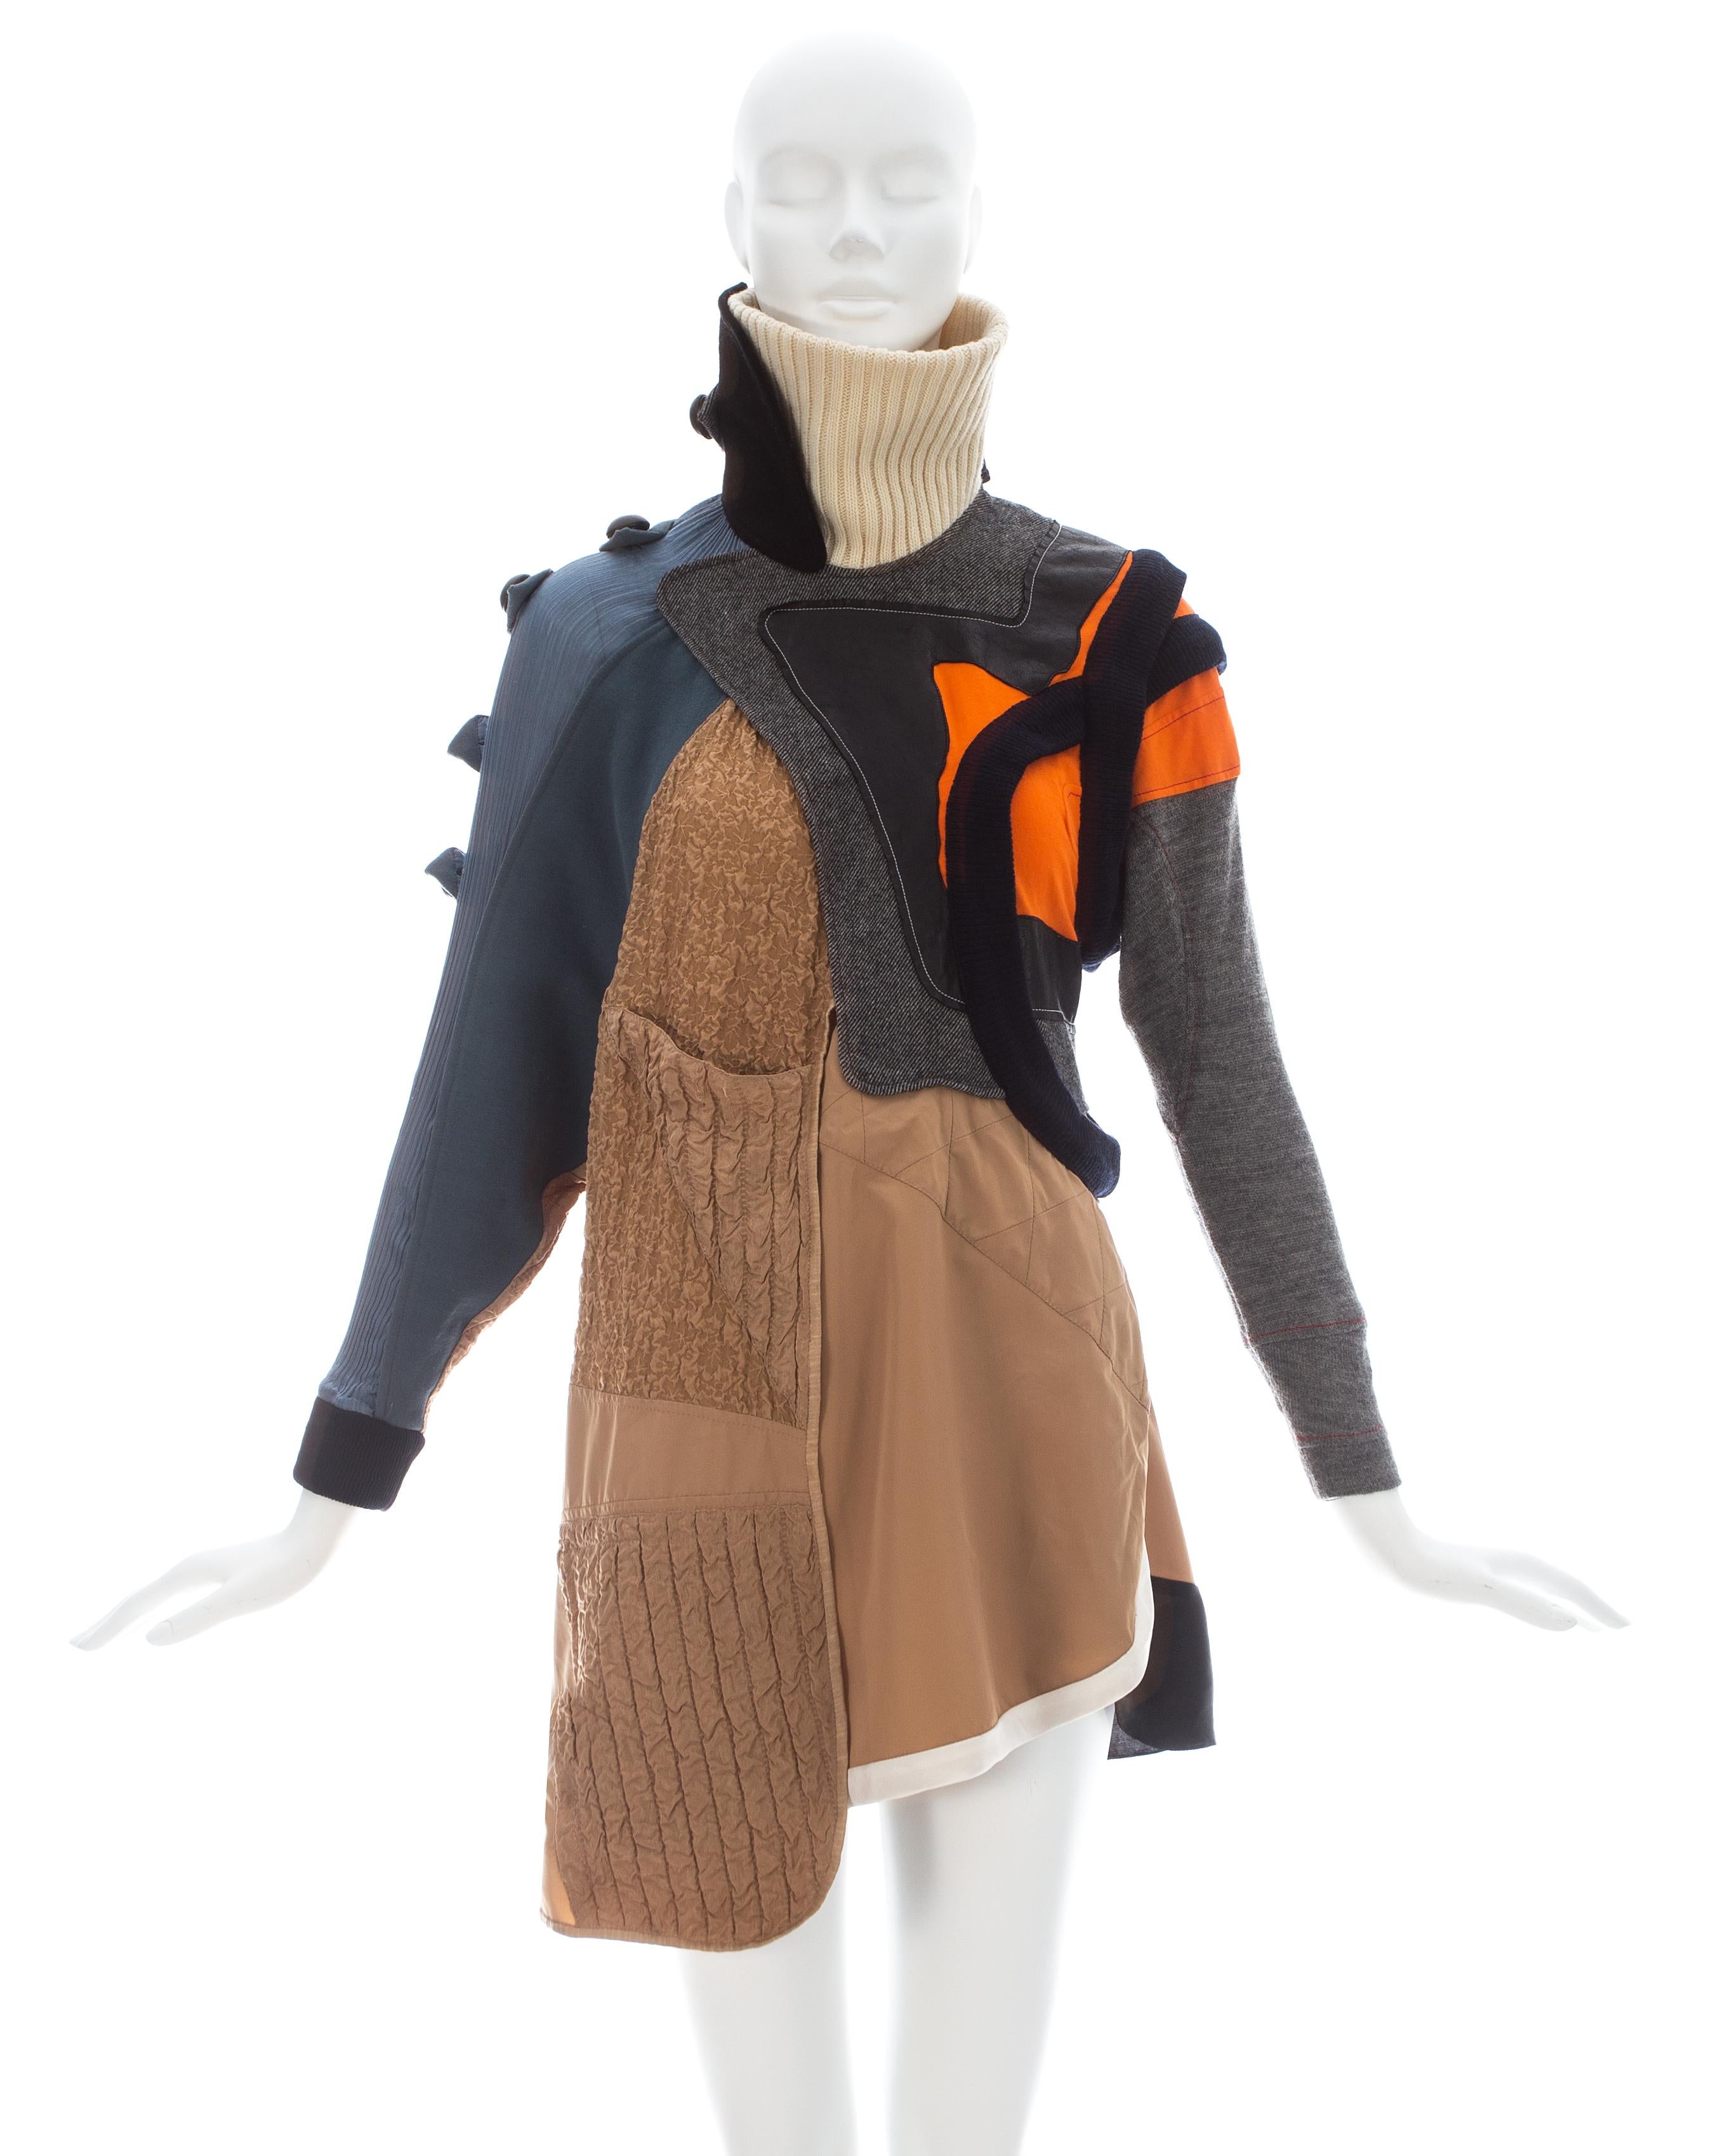 Sports dress made from wool, leather, silk and synthetic fabrics 

Fall-Winter 2002 